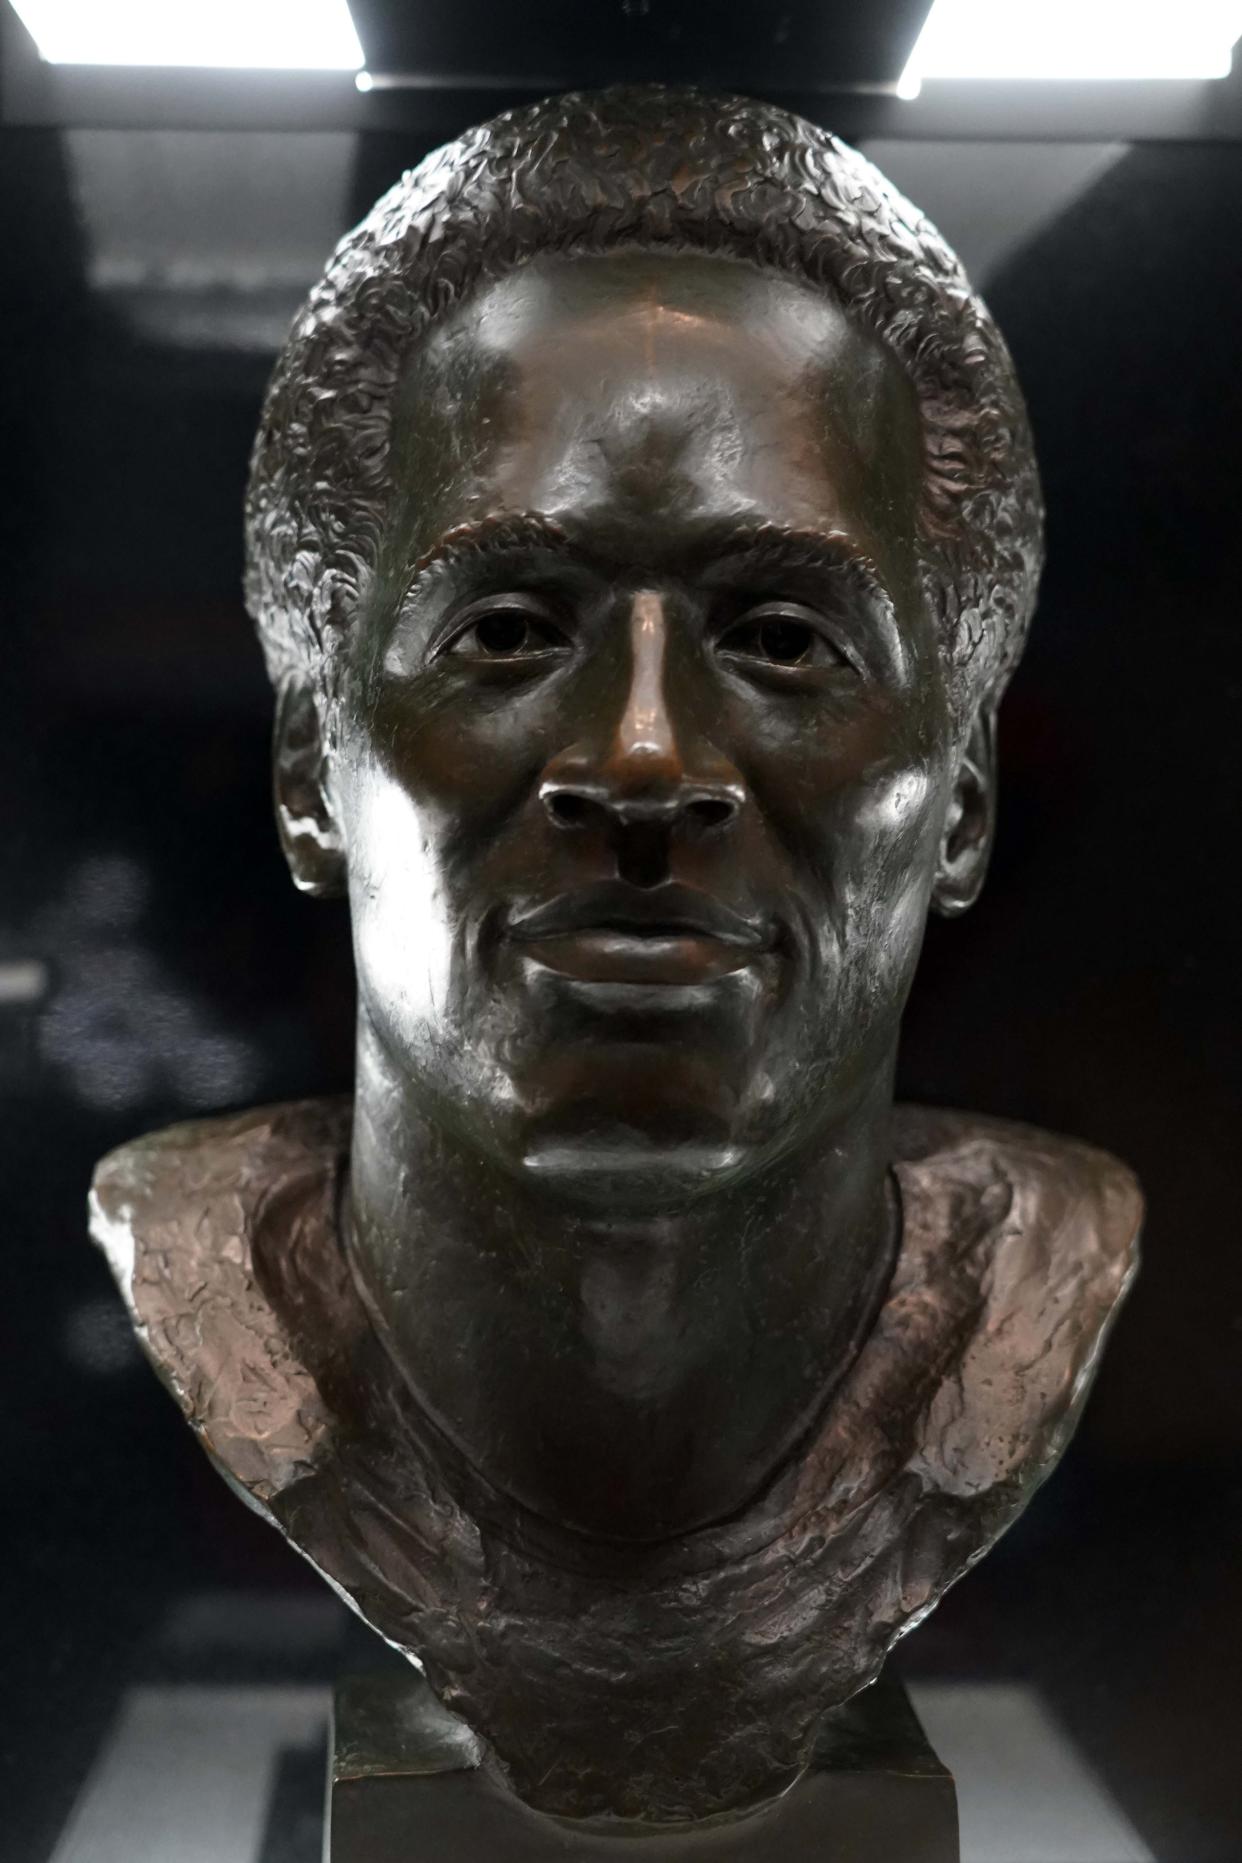 The bust of 1985 enshrinee O.J. Simpson on display at the Pro Football Hall of Fame, April 28, 2021.